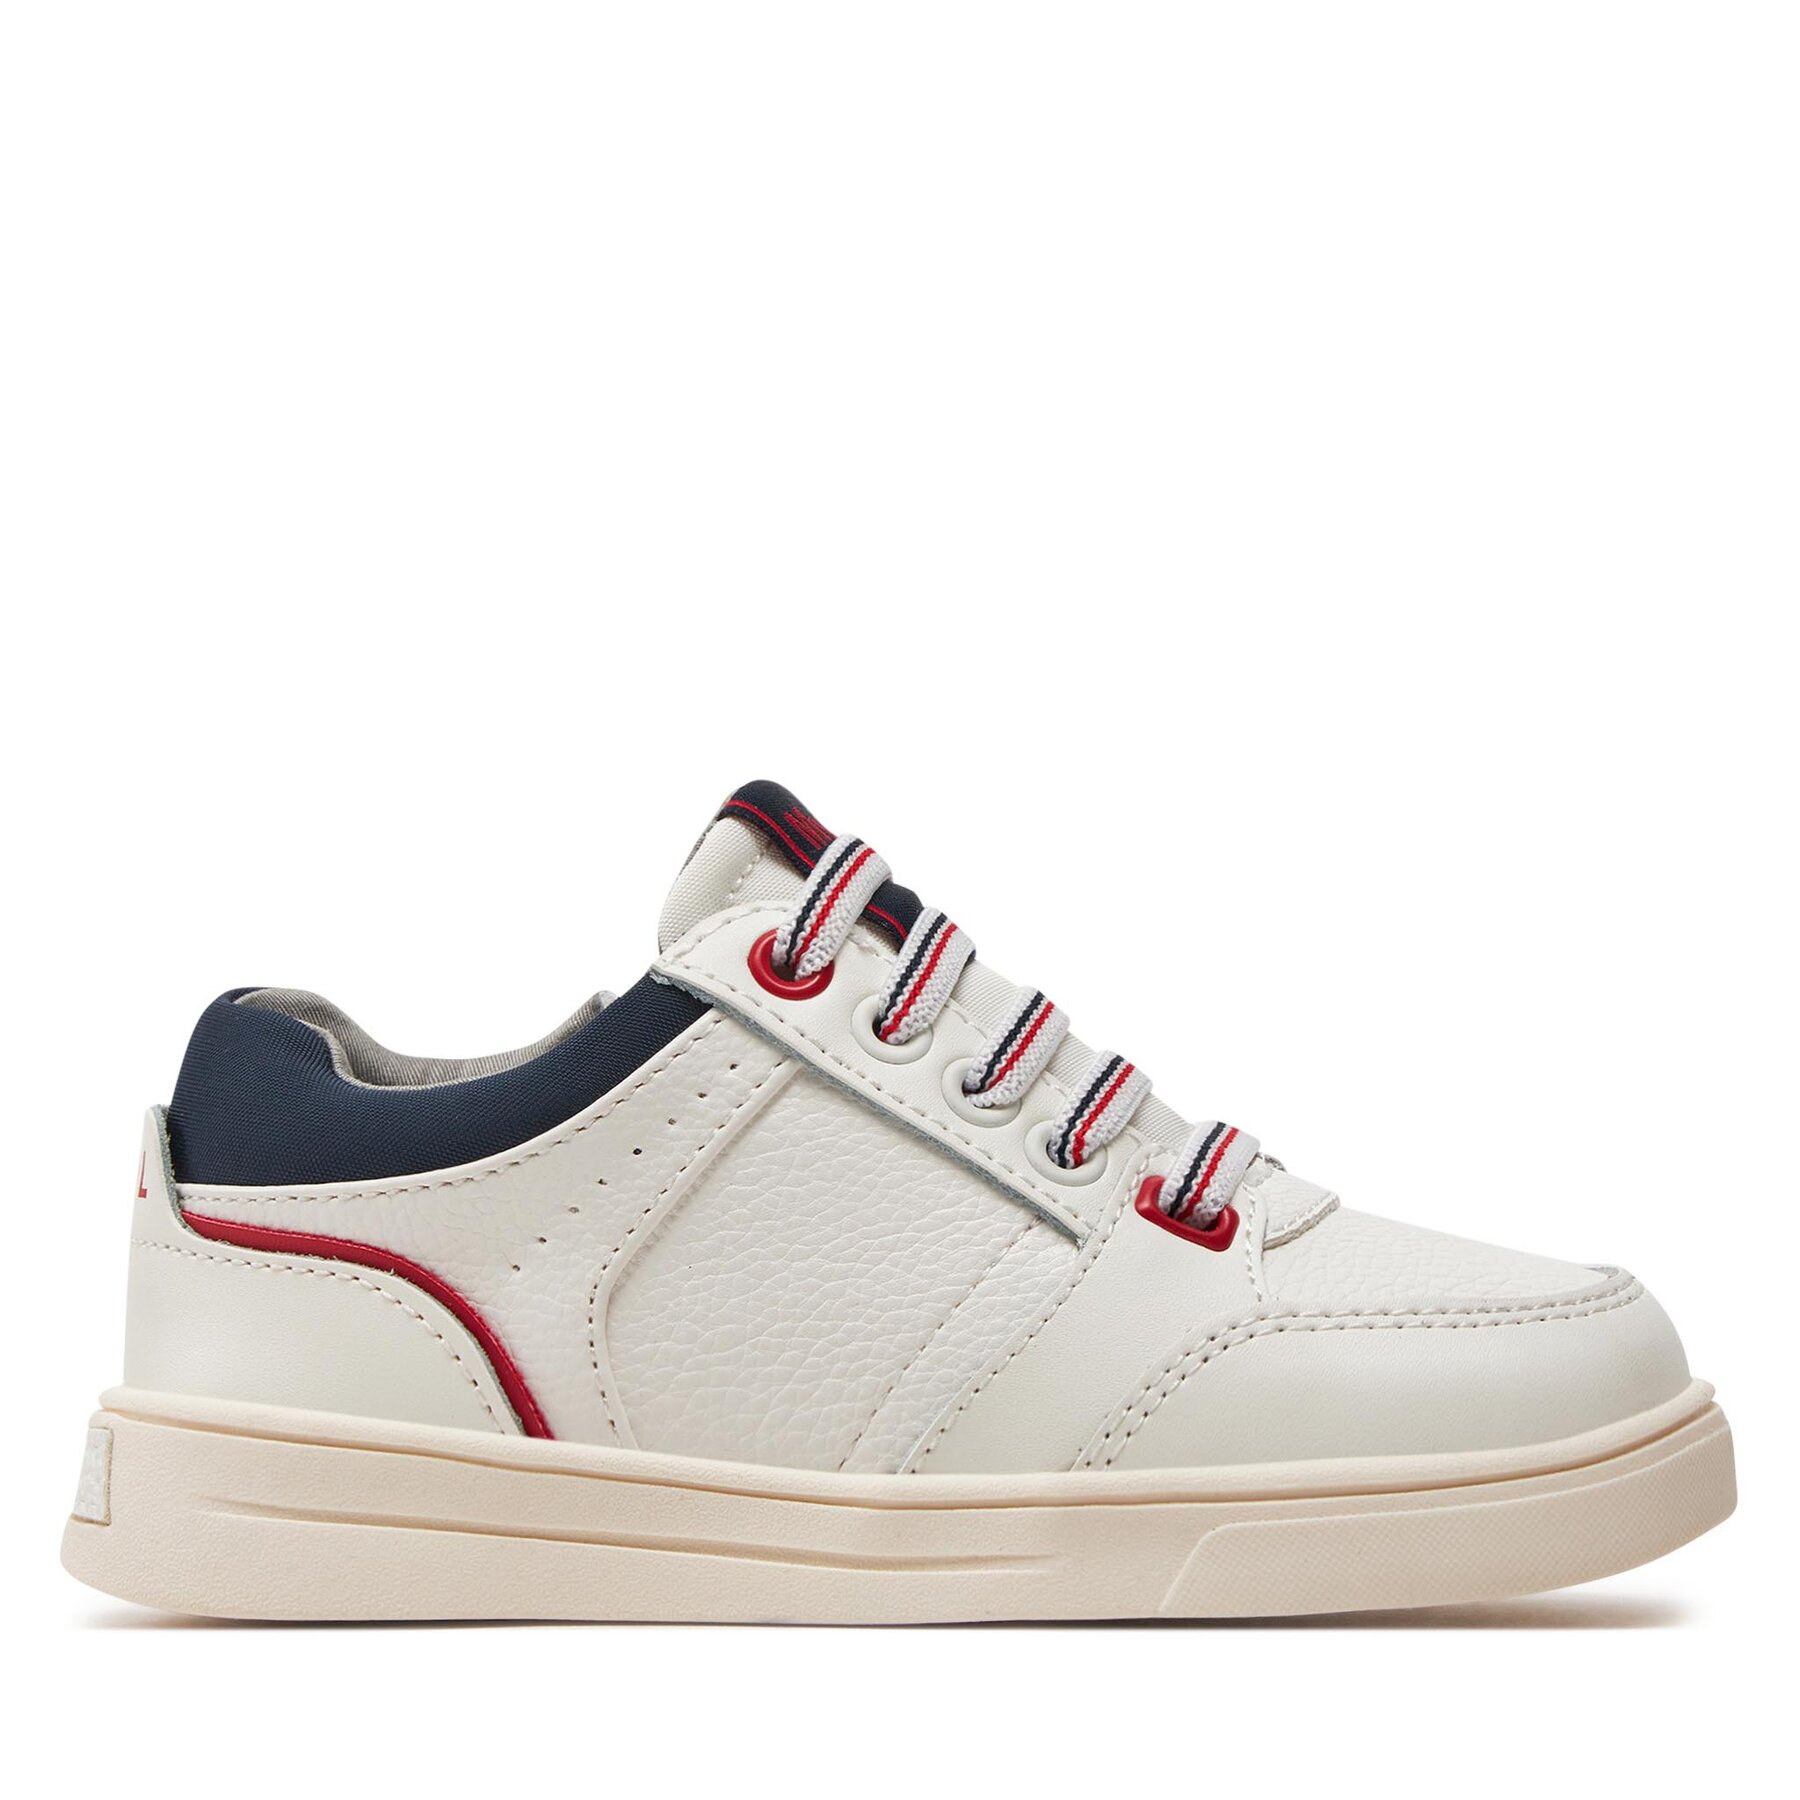 Sneakers Mayoral 43569 White Red 18 von Mayoral